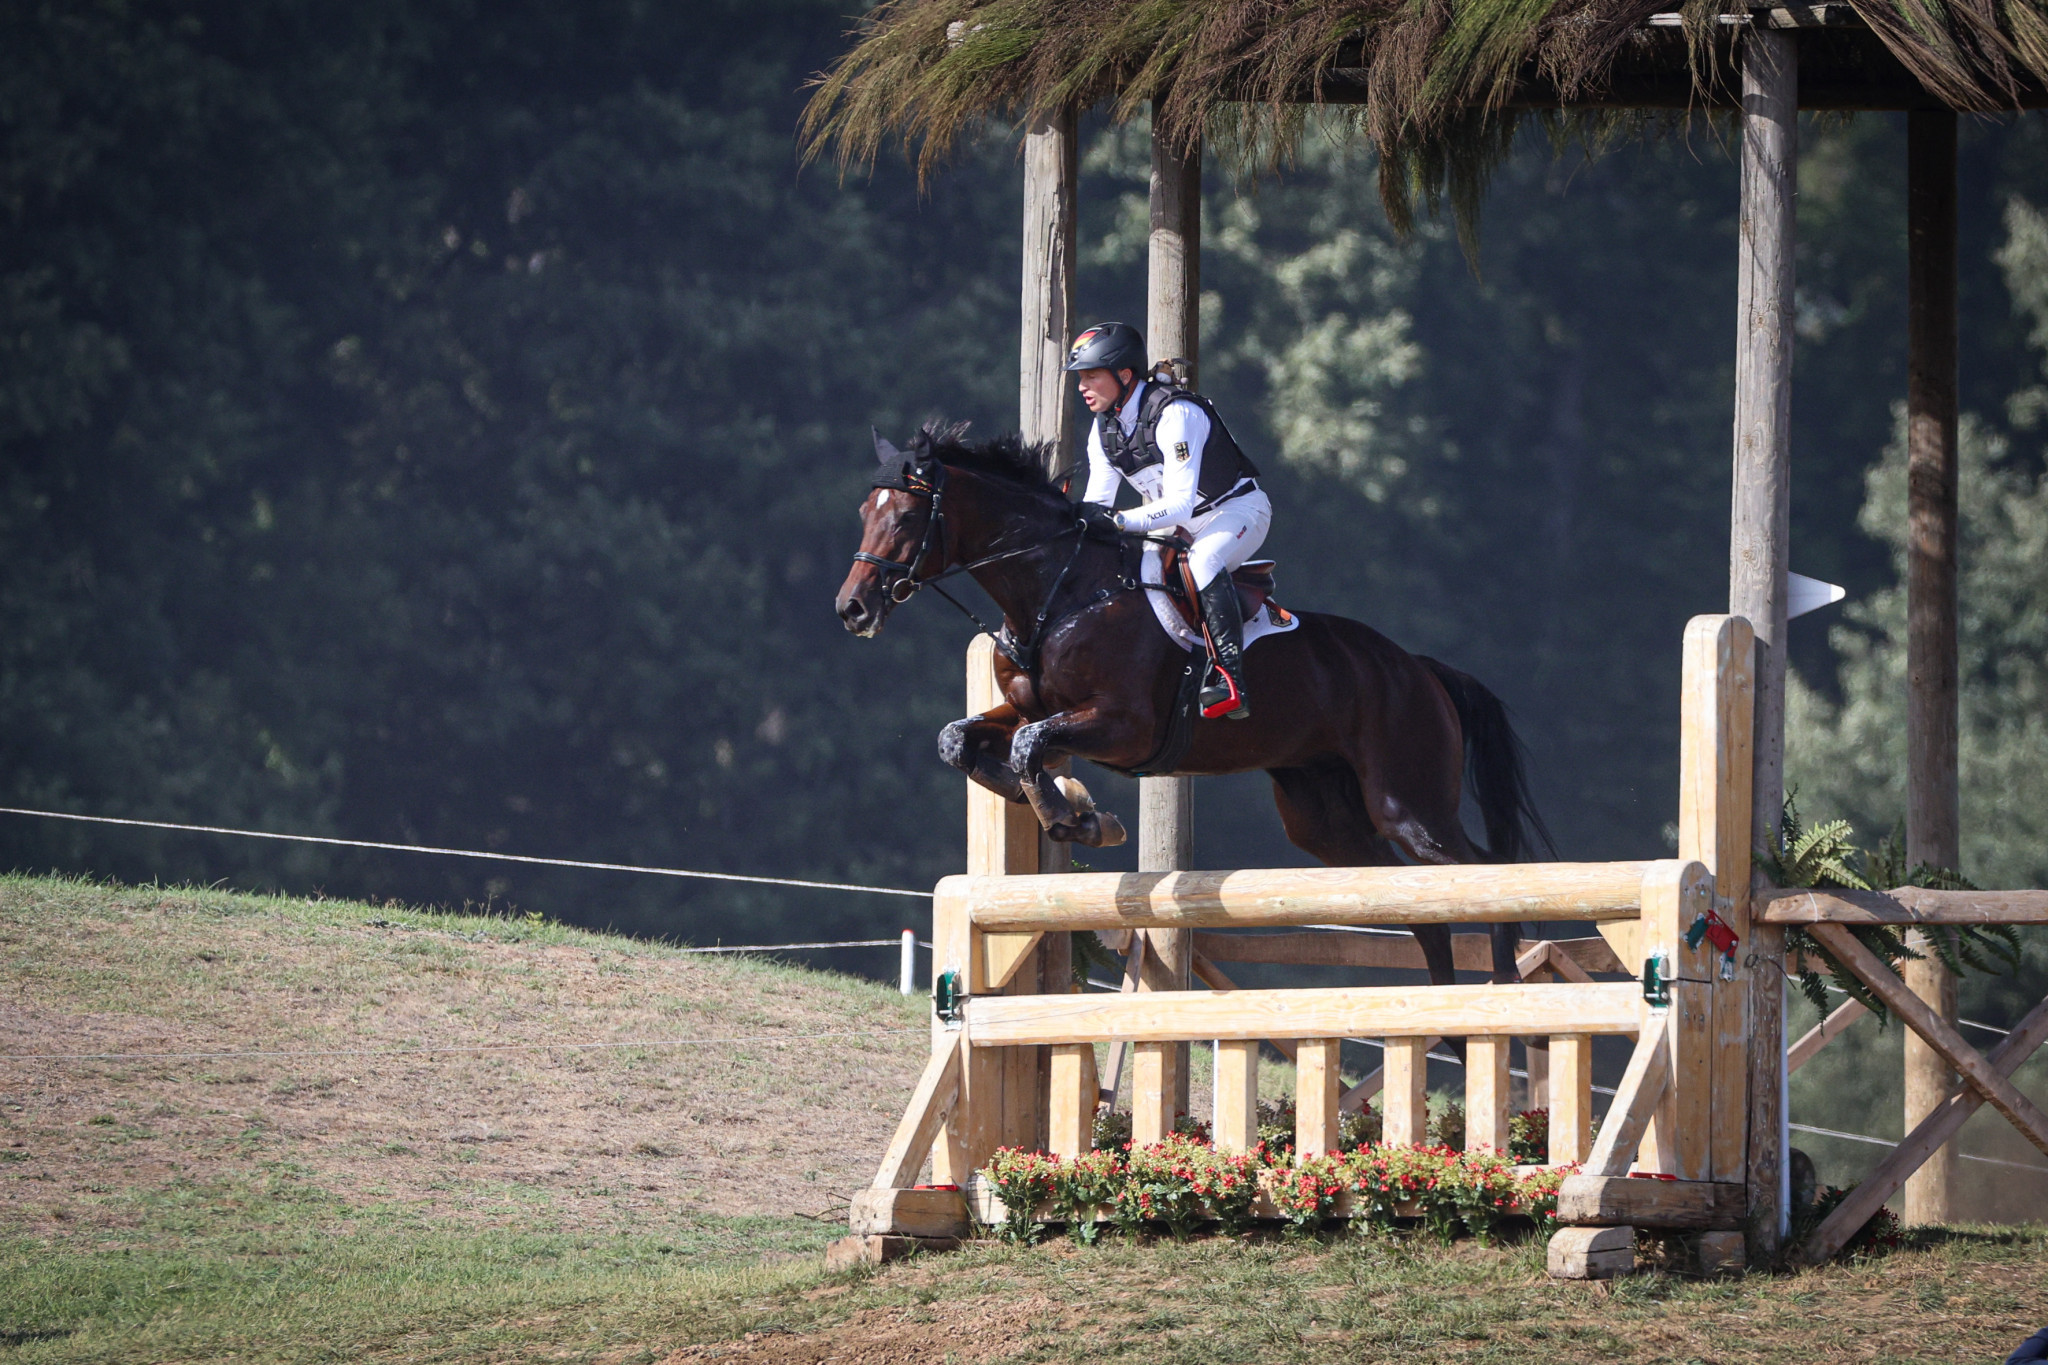 Bach visits FEI World Eventing Championships on good day for Germany